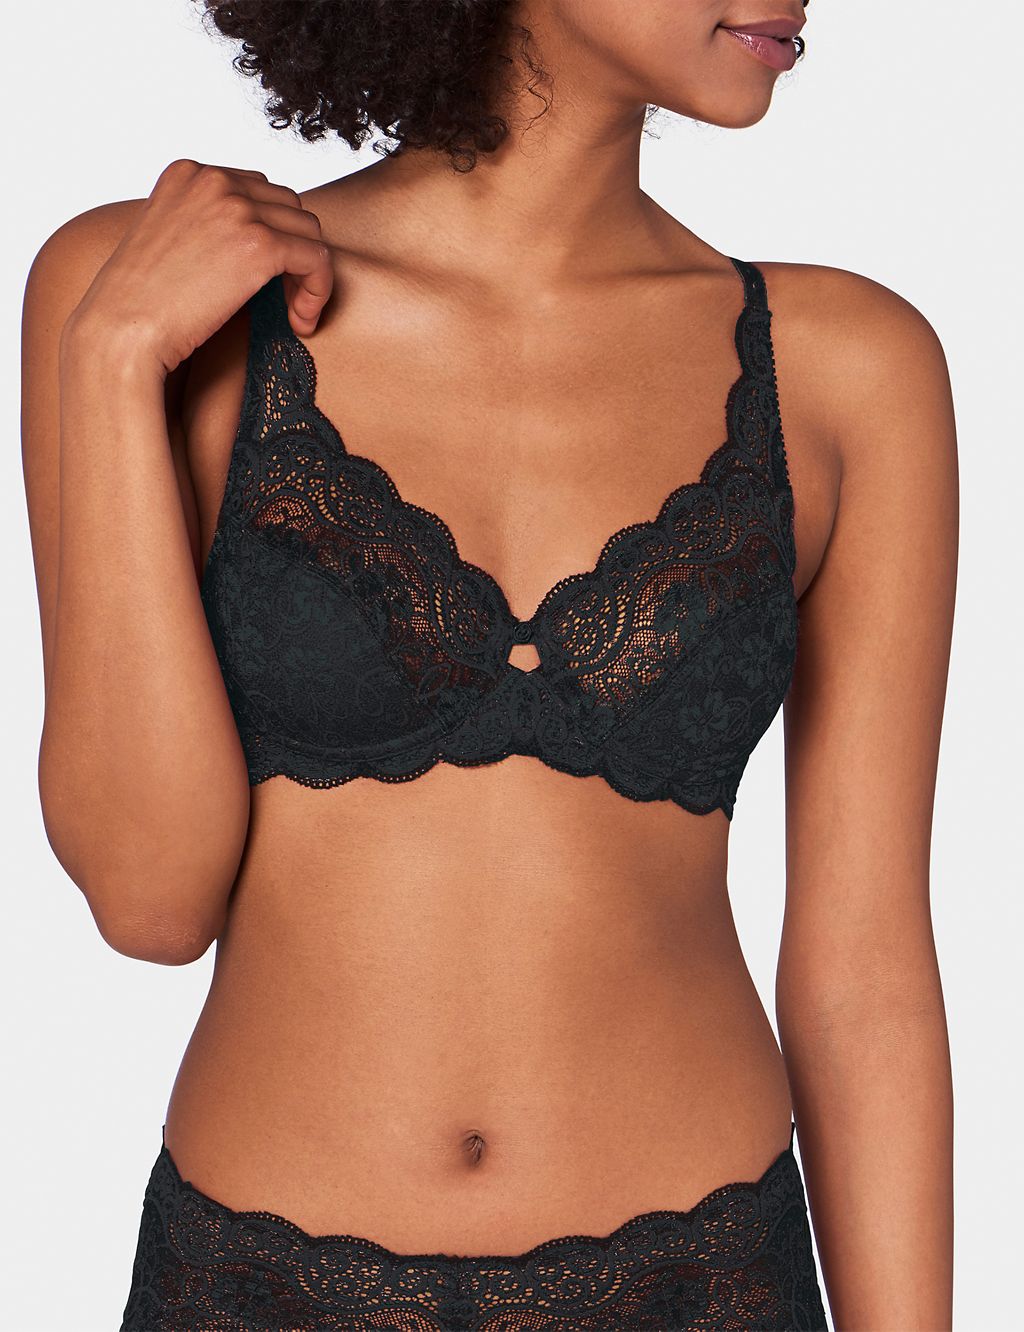 Amourette 300 Lace Underwired Full Cup Bra B-G 2 of 4